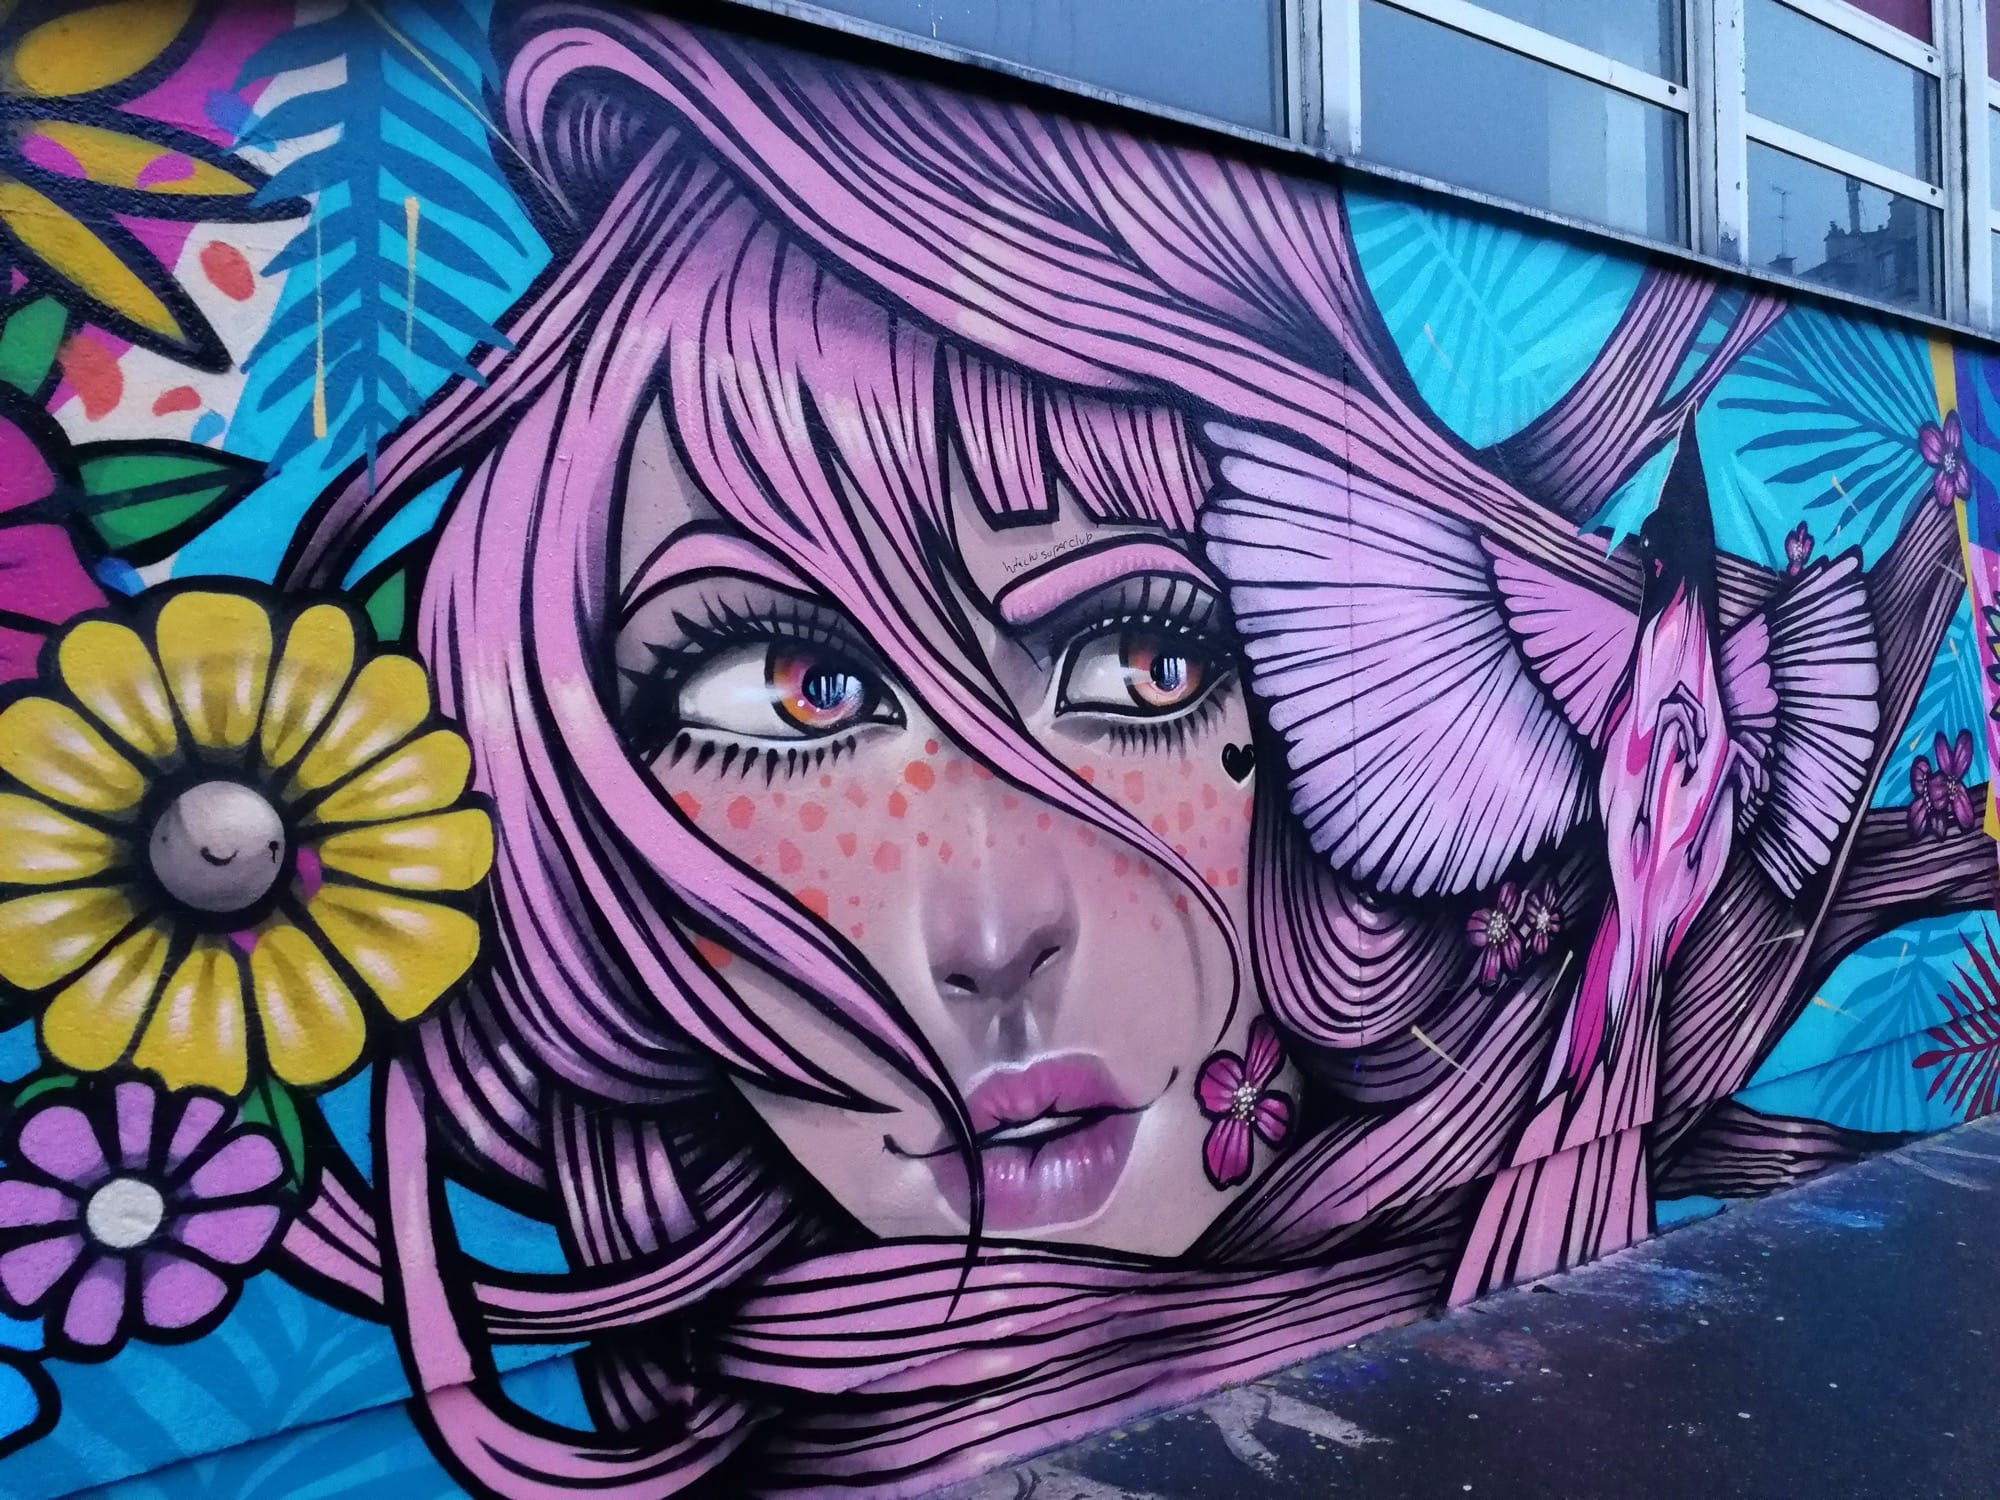 Graffiti 529  captured by Rabot in Paris France